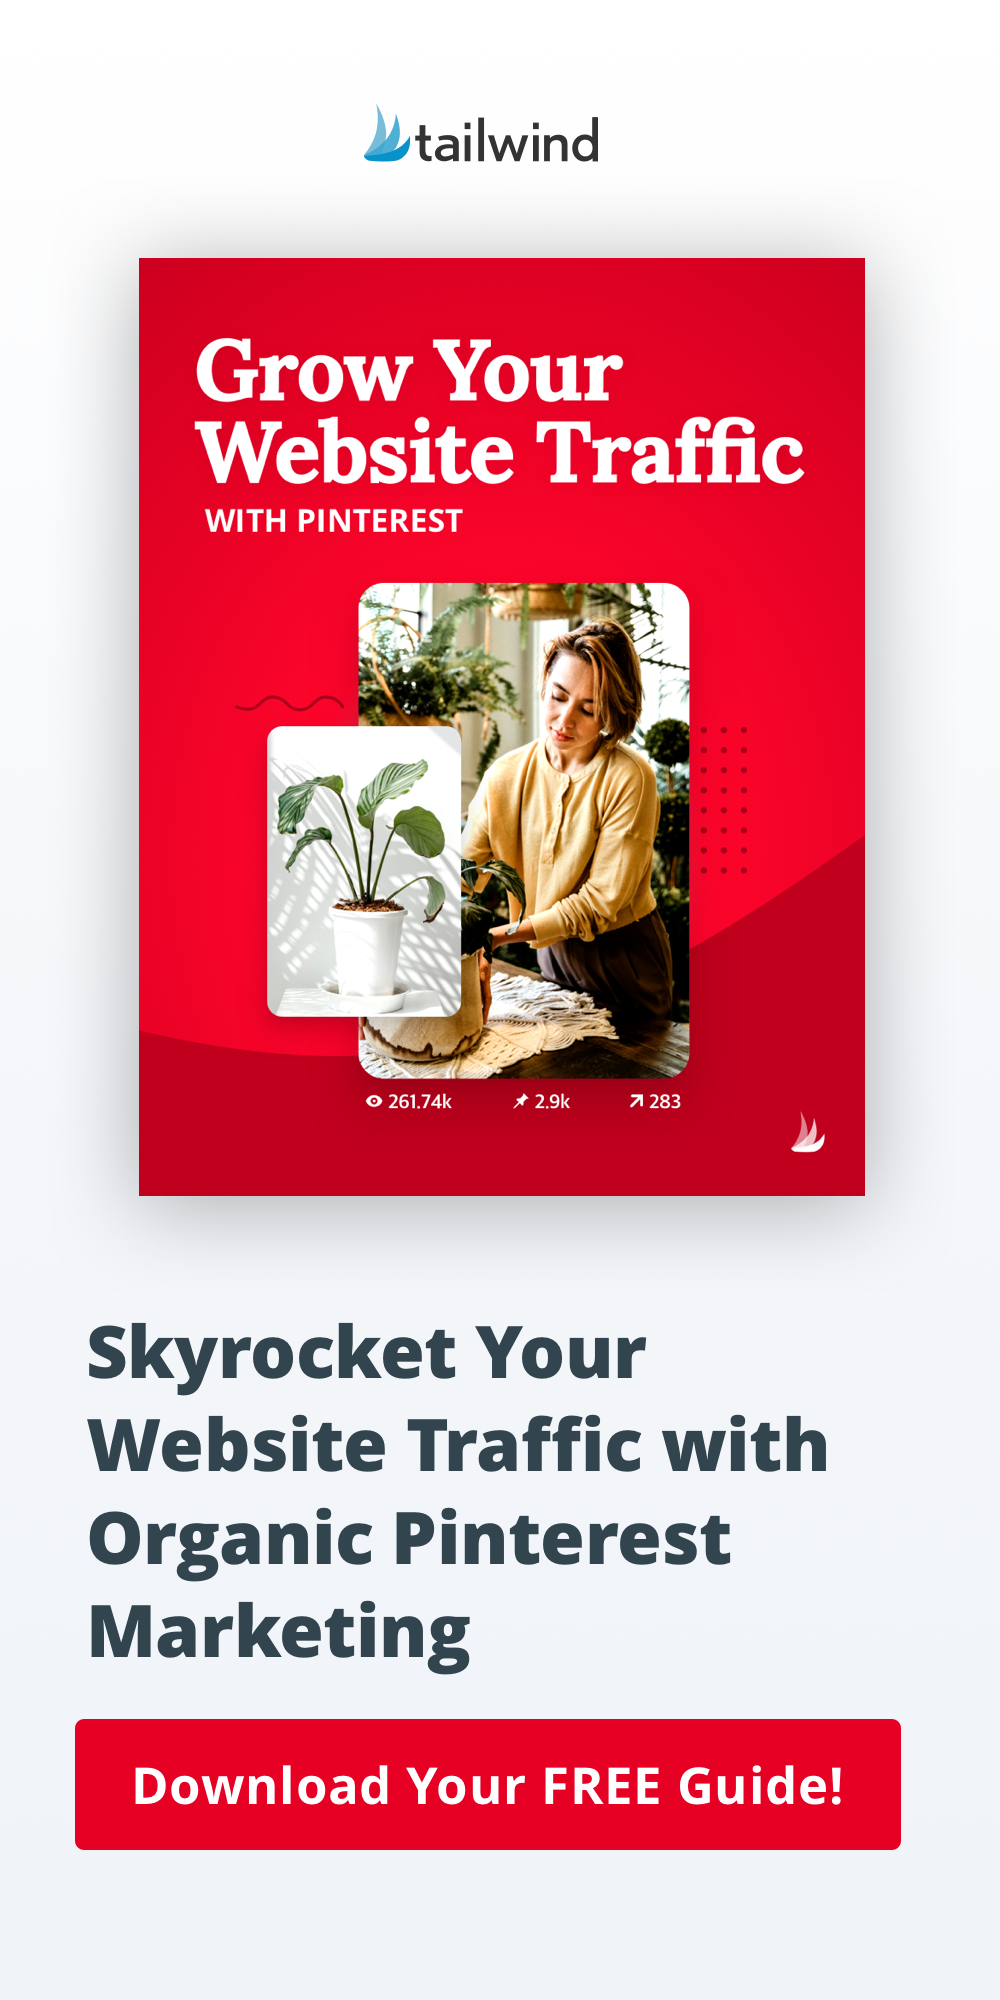 Skyrocket your website traffic with this downloadable guide to organic Pinterest marketing! This simple guide is your no-fluff, no-jargon, no-kidding passport to substantial traffic growth from Pinterest.